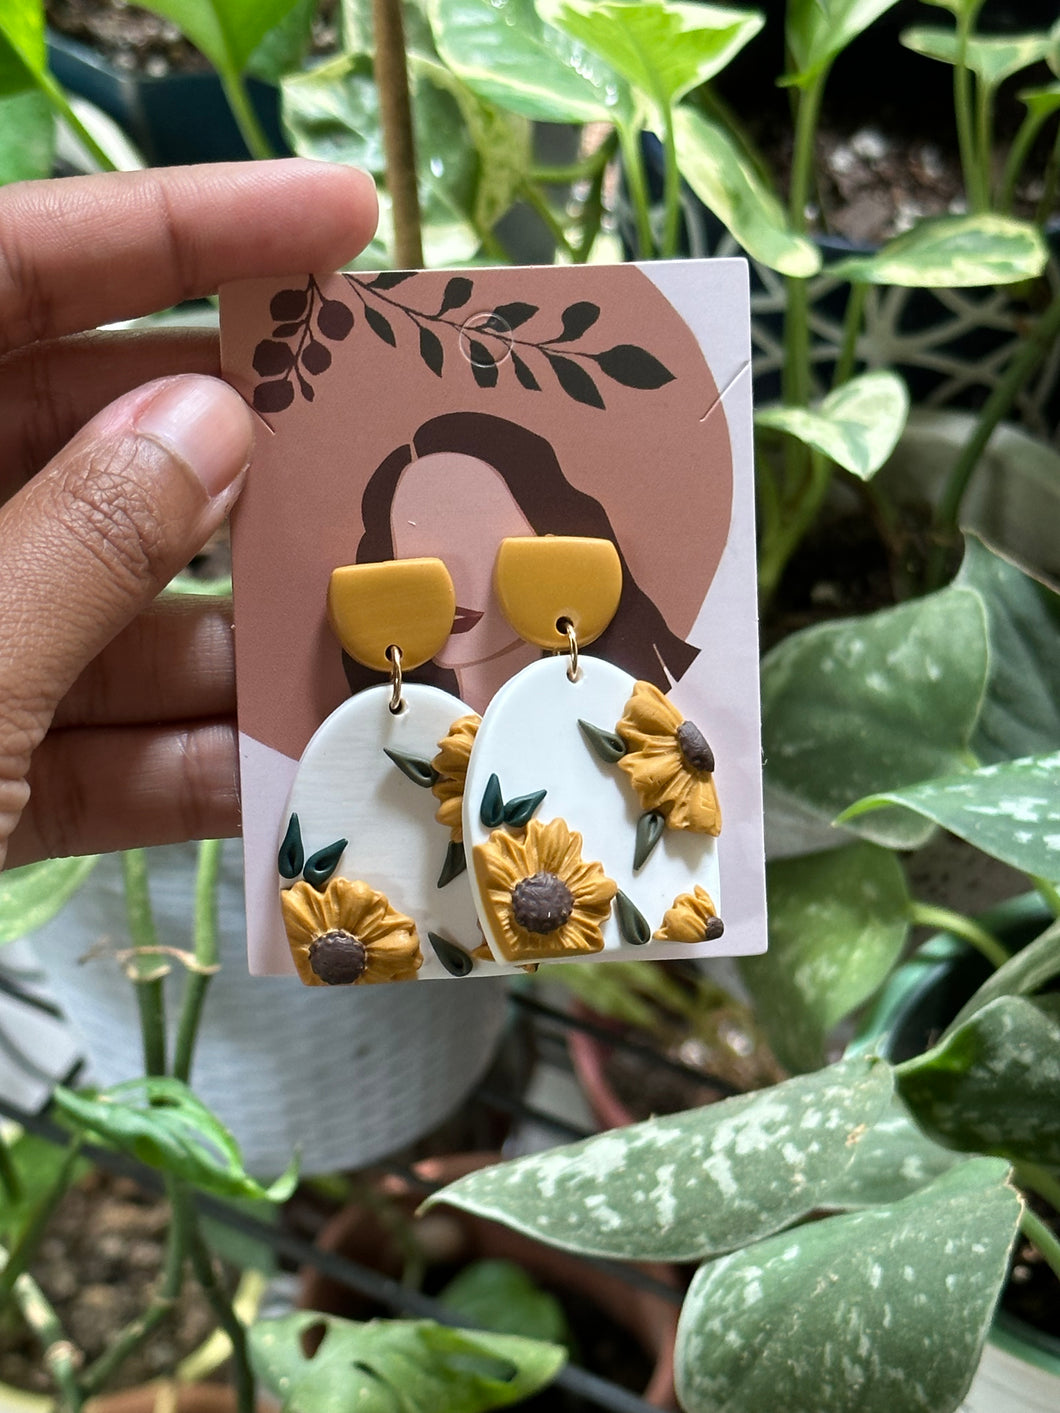 Copy of Sunflower Polymer Clay Earrings - Arch Style